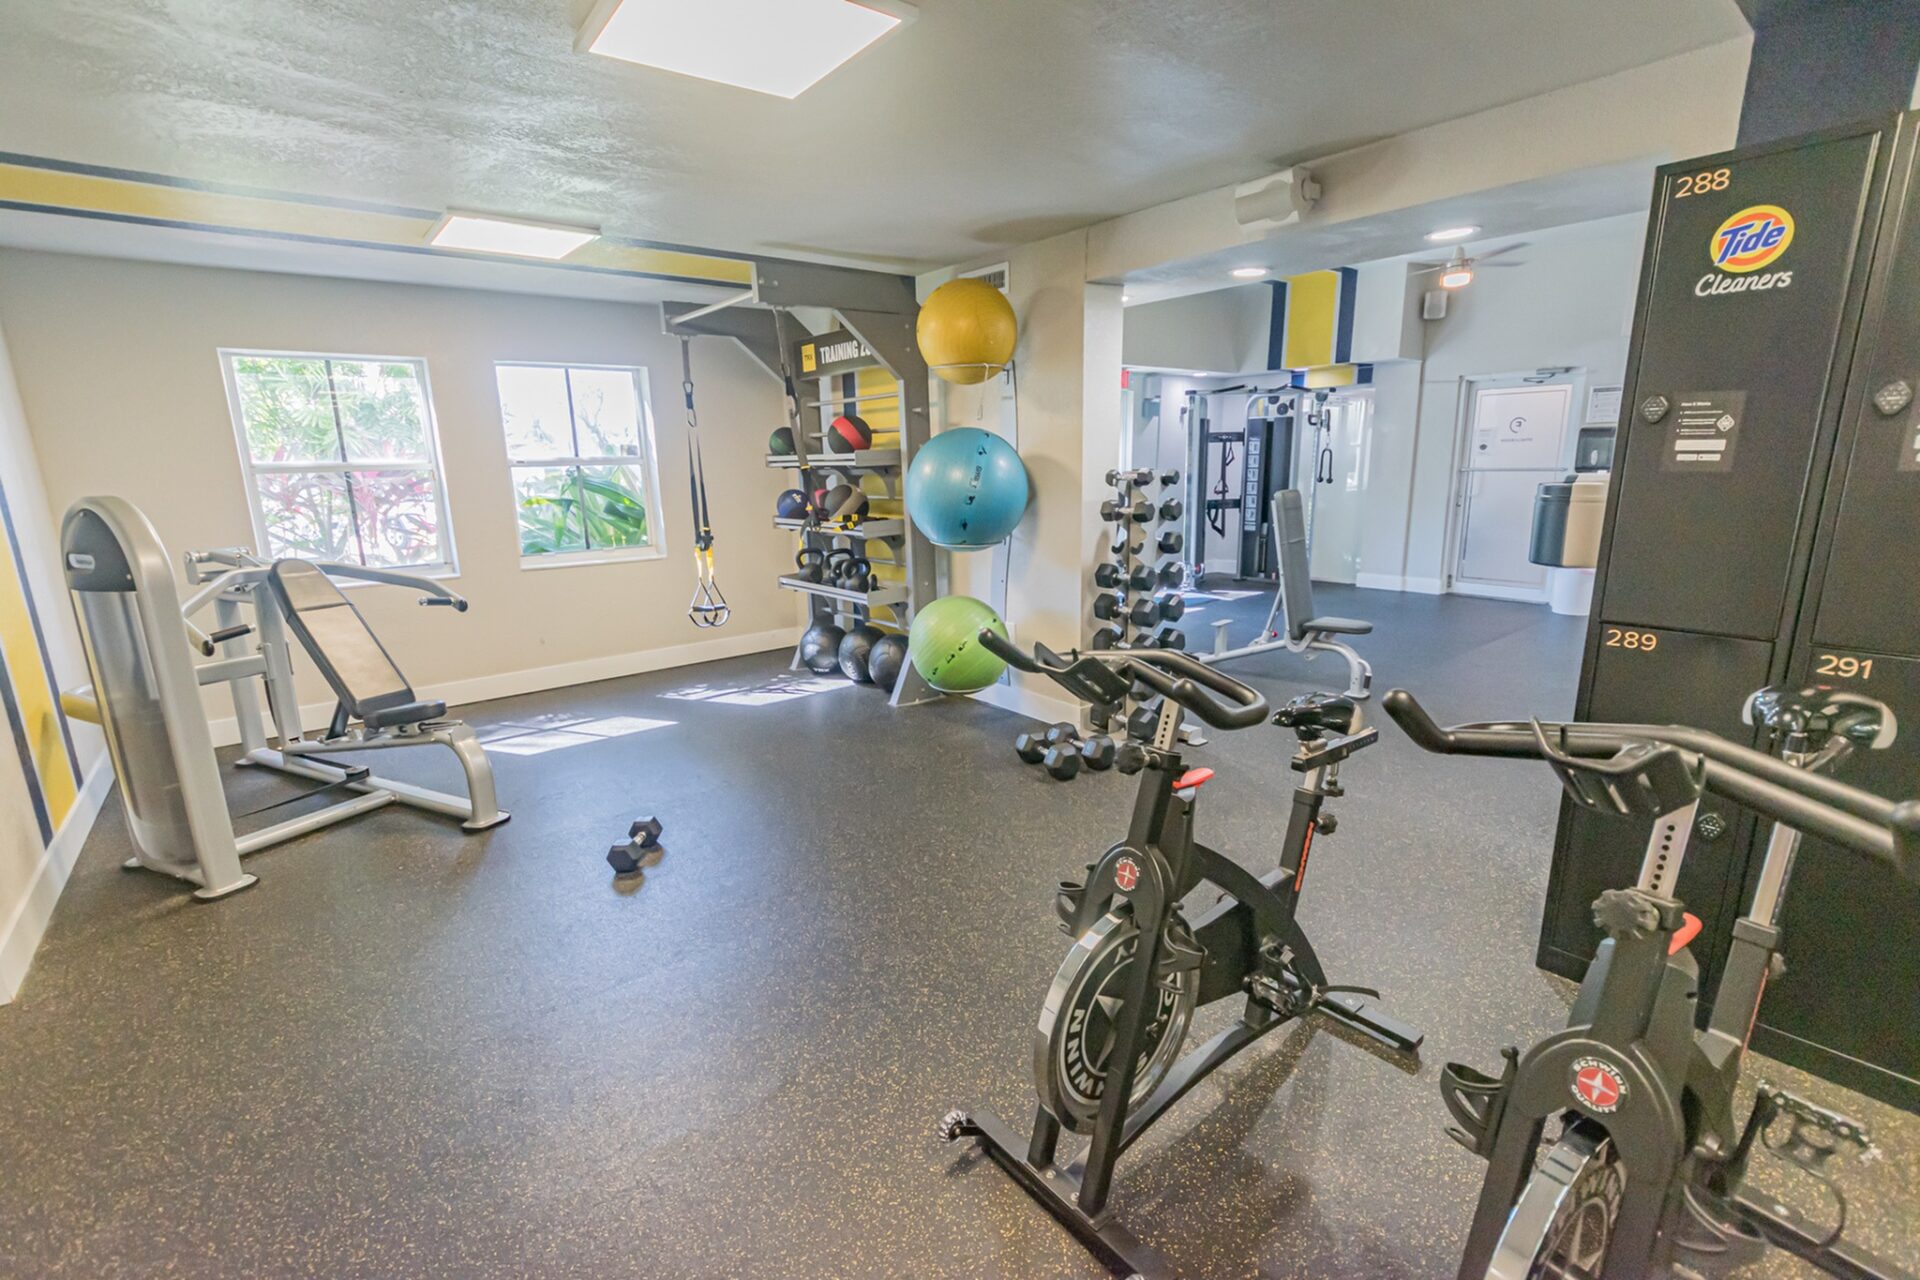 Indoor gym with a variety of workout equipment.